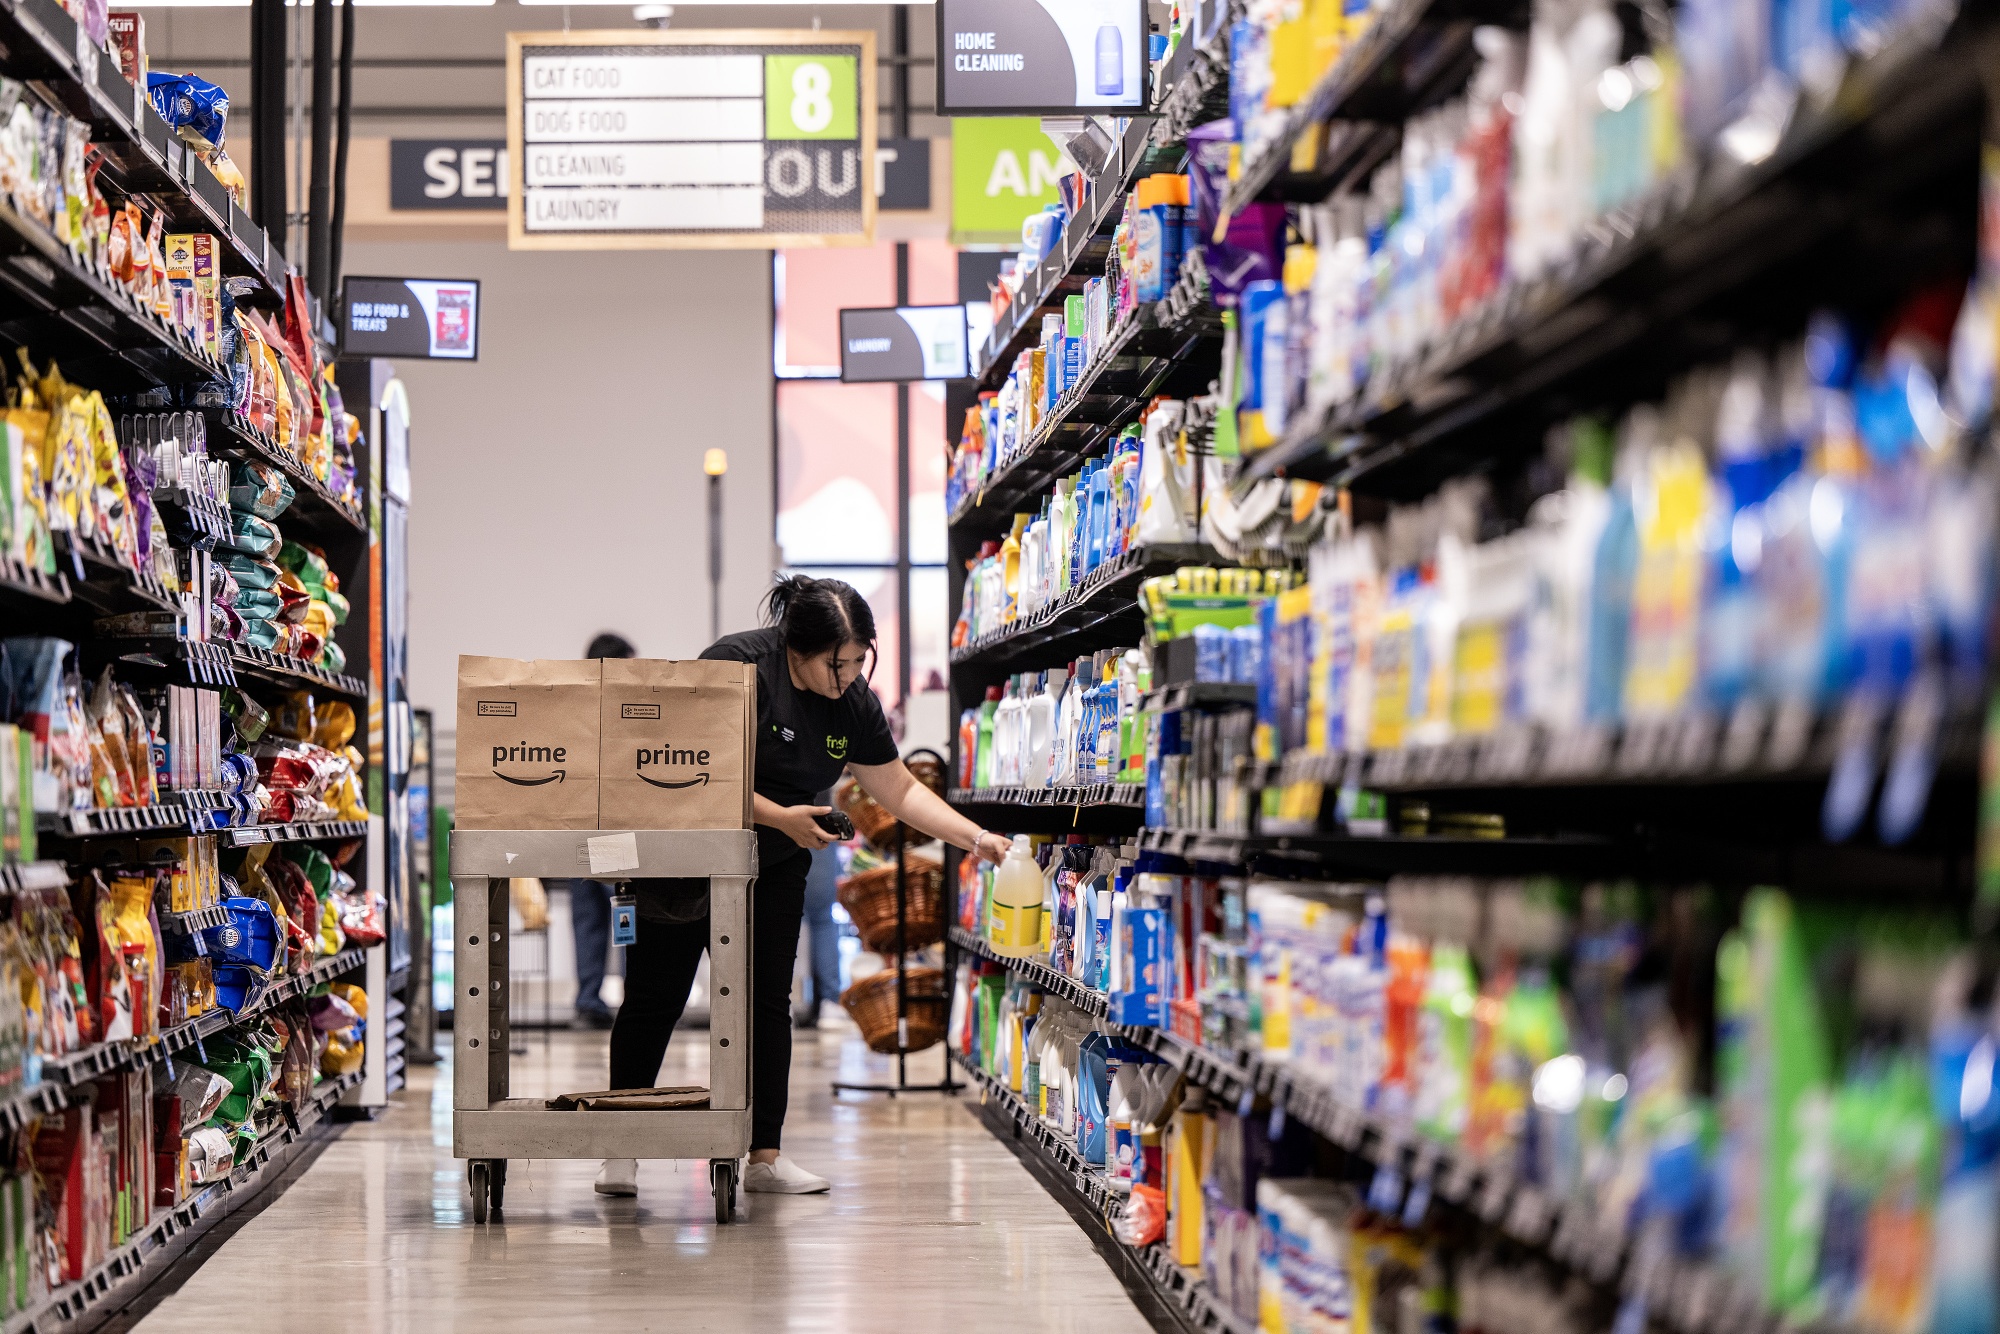 Expands US Grocery Delivery, Resumes Supermarket Openings